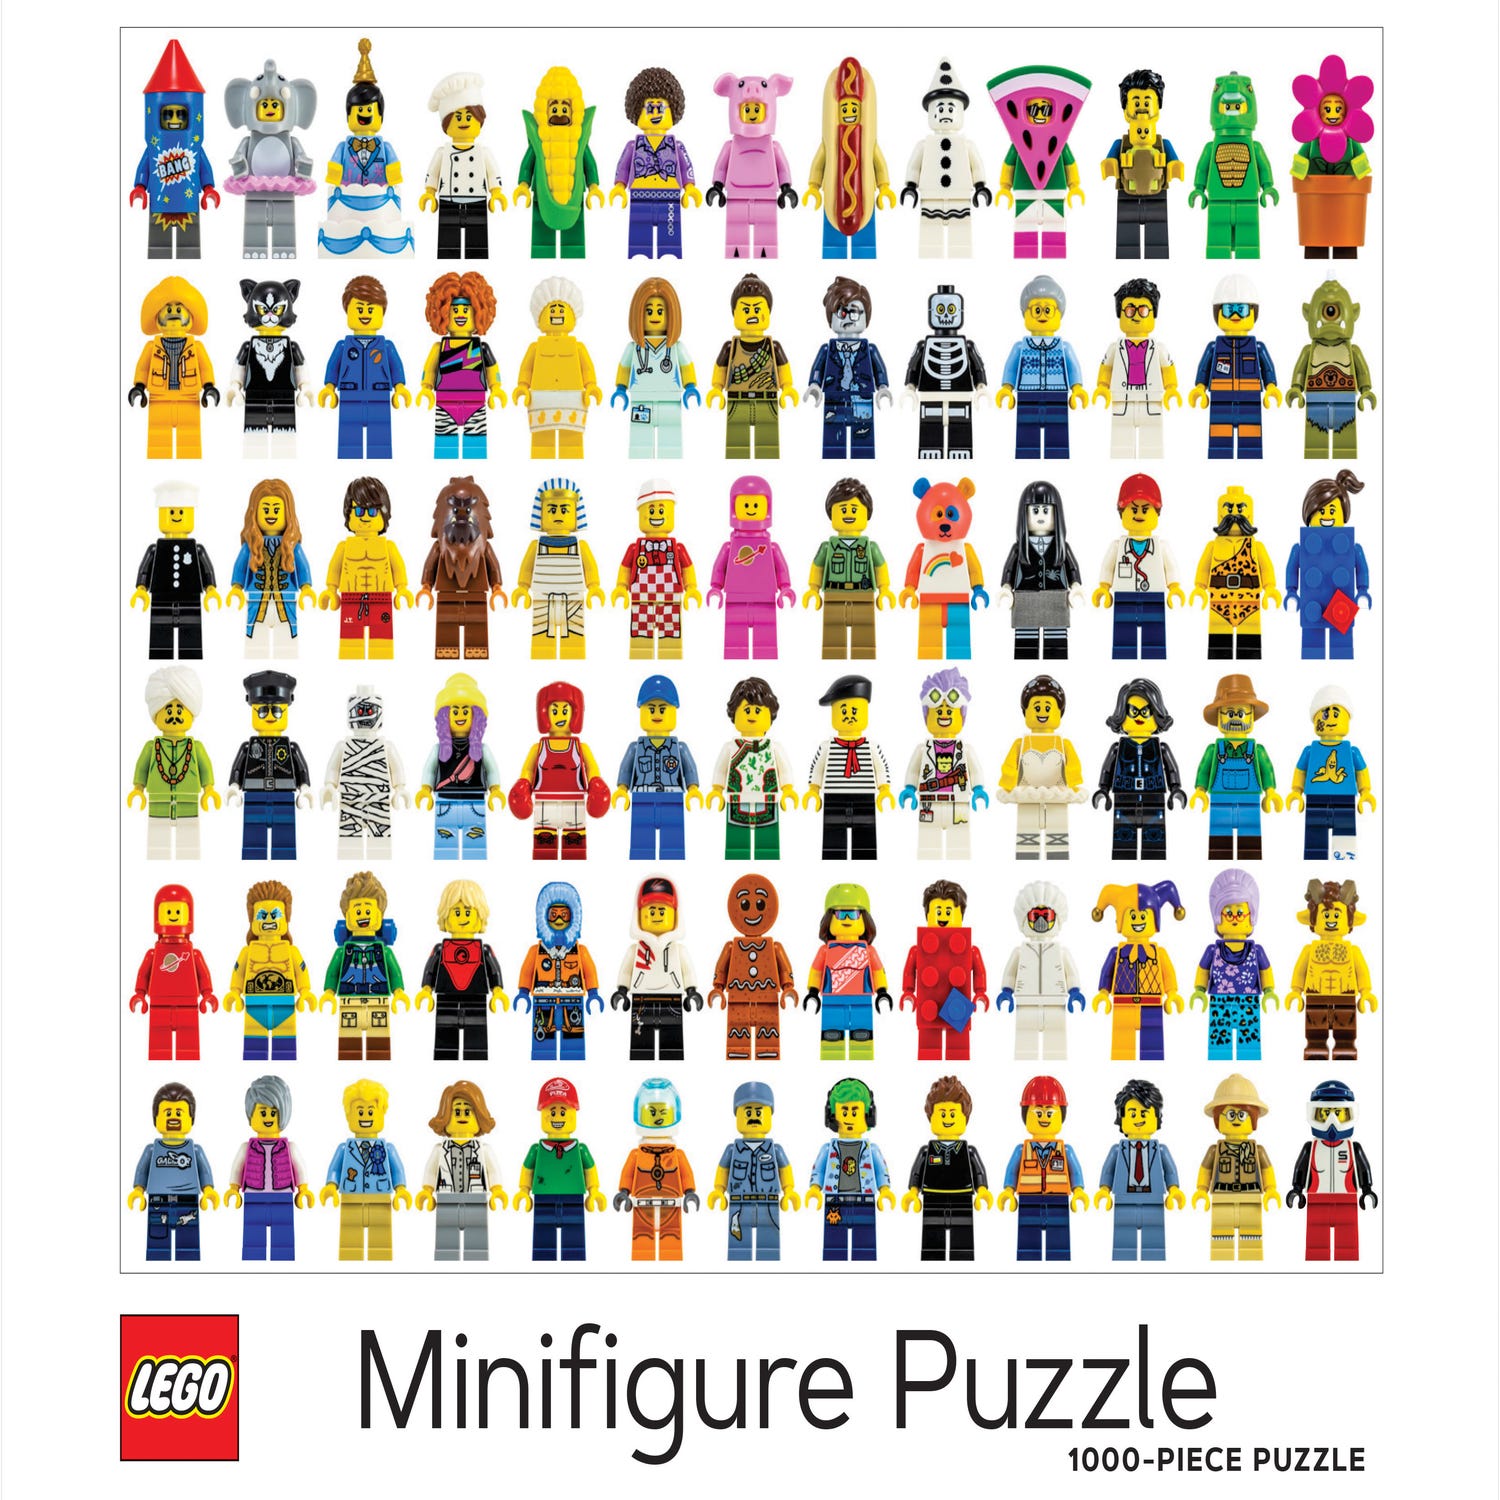 Minifigure 1,000-Piece Puzzle 5007071 | Buy online at the Official LEGO® Shop US